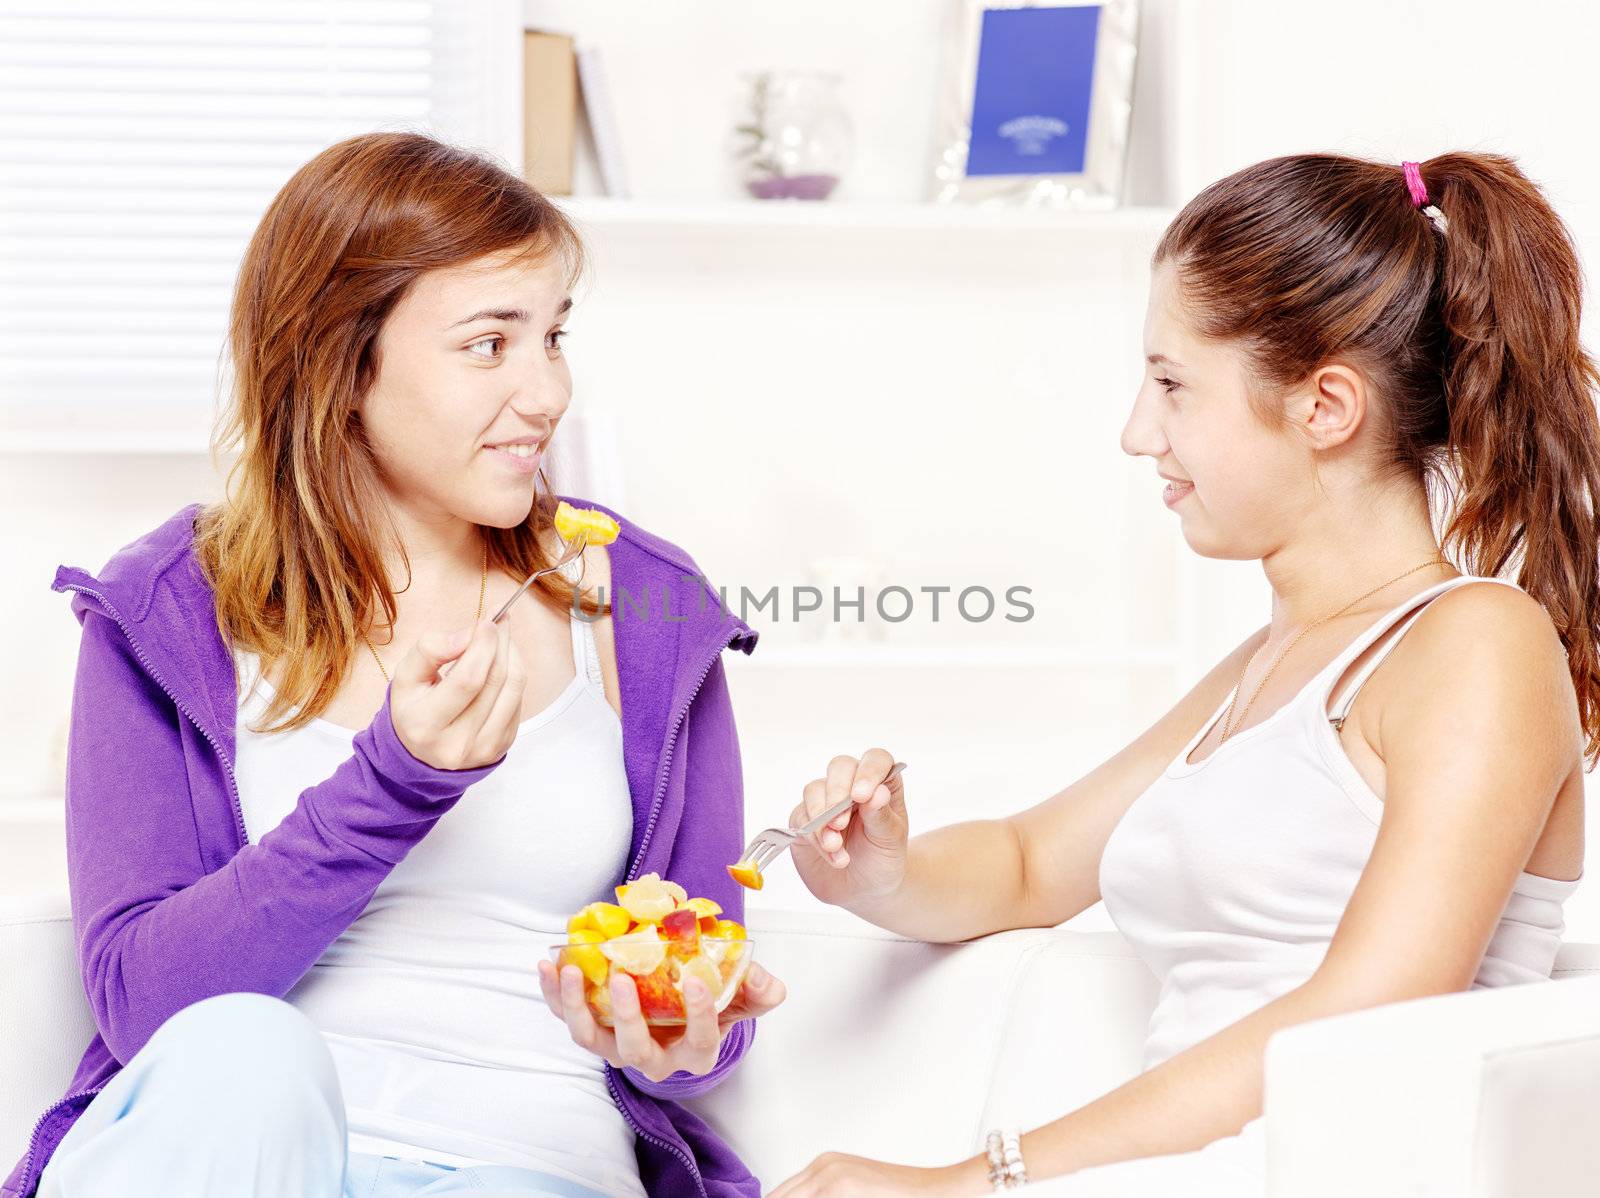 Teenage girls chating and eating fruit salad by imarin